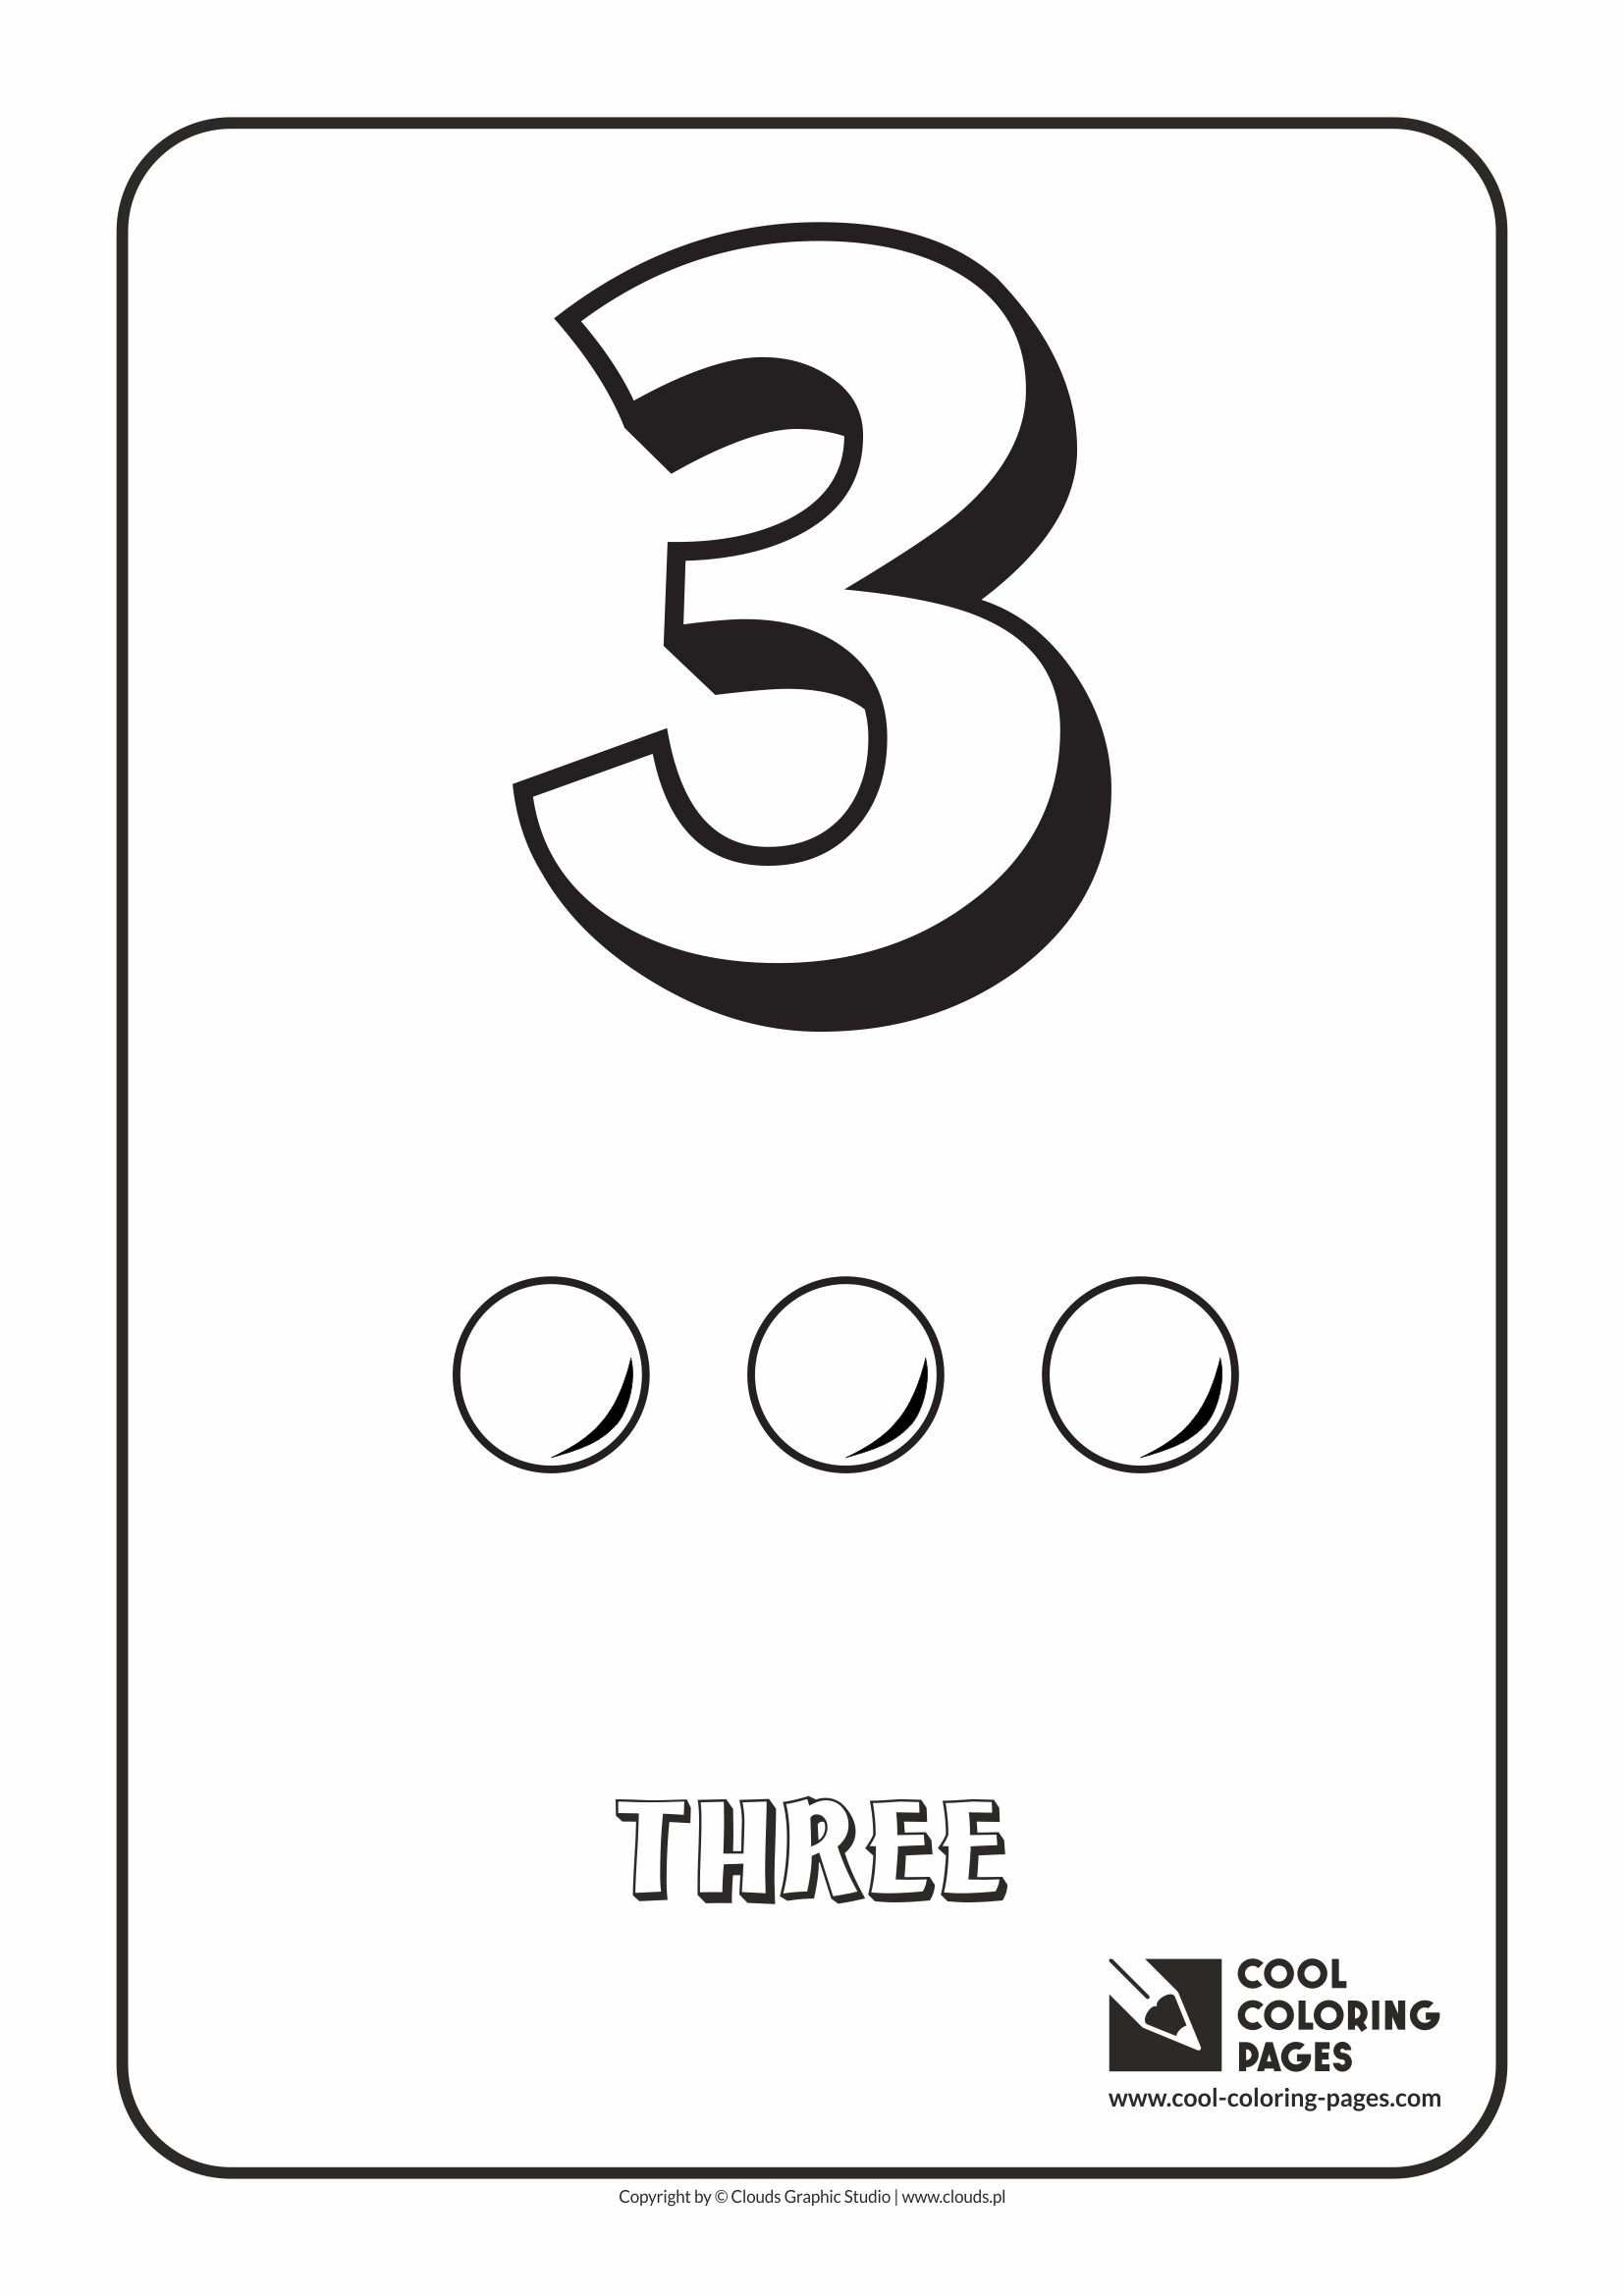 Cool Coloring Pages - Digits / Digit 3 / Coloring page with digit 3